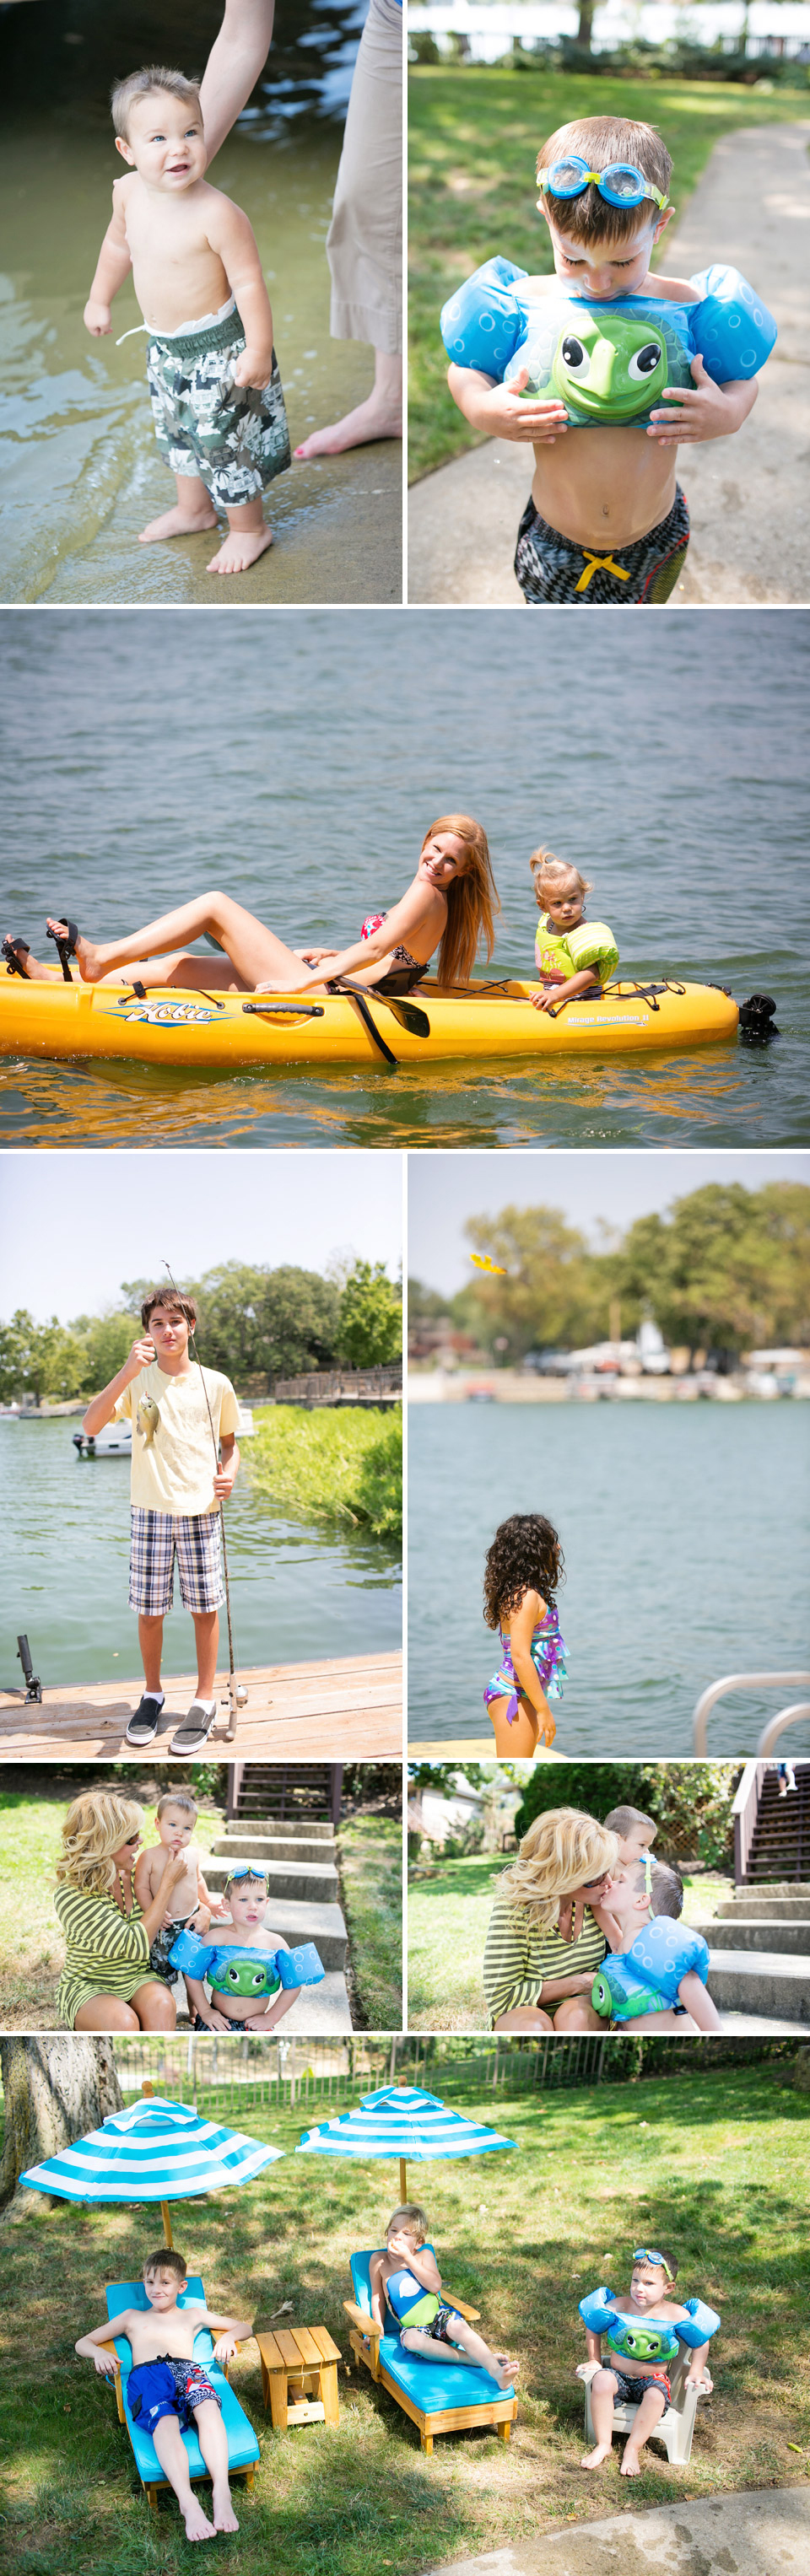 Kayak, sailboats, fishing, swimming, family outings, outdoor photography, sessions